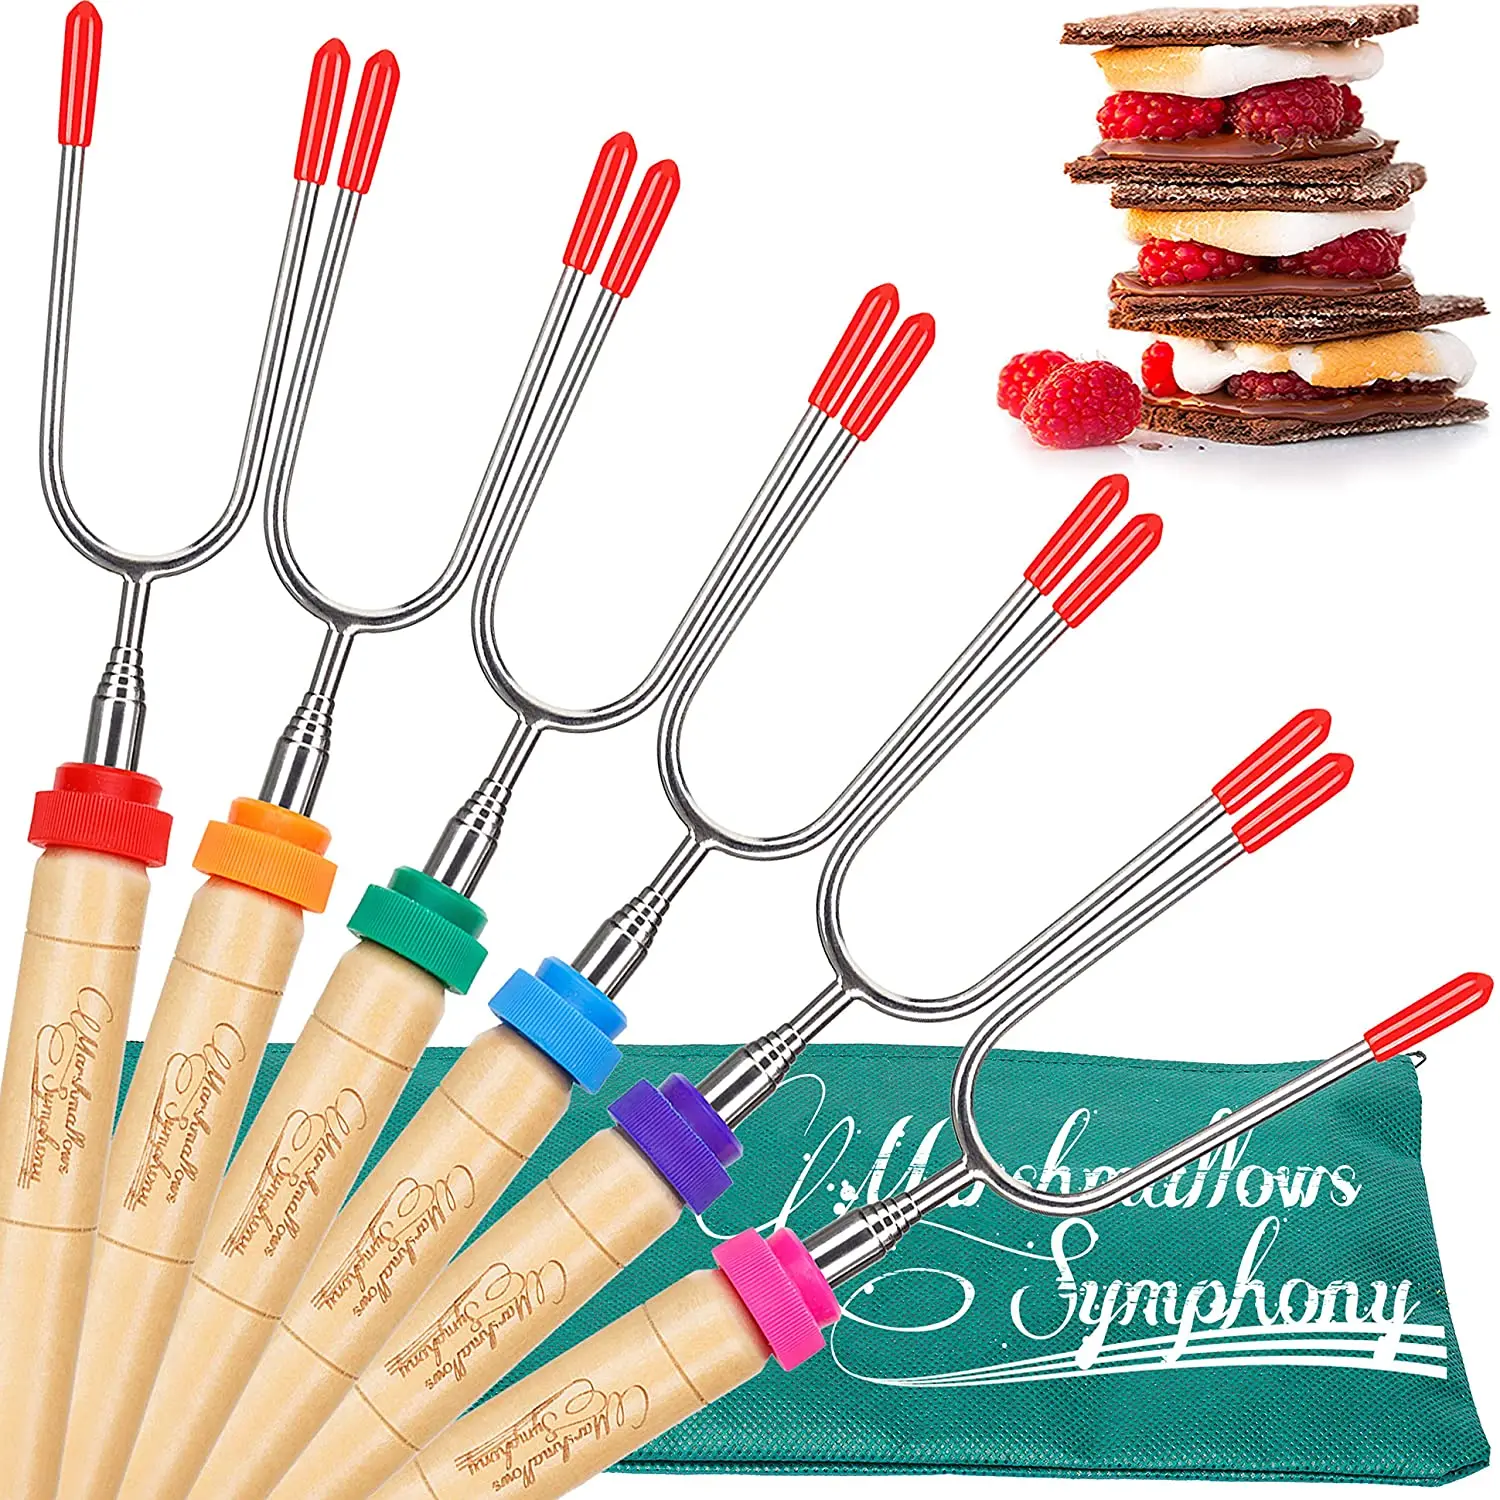 

Campfire Roasting Sticks for Marshmallow Hot Dog,Set of 6 Telescopic Smores Skewers